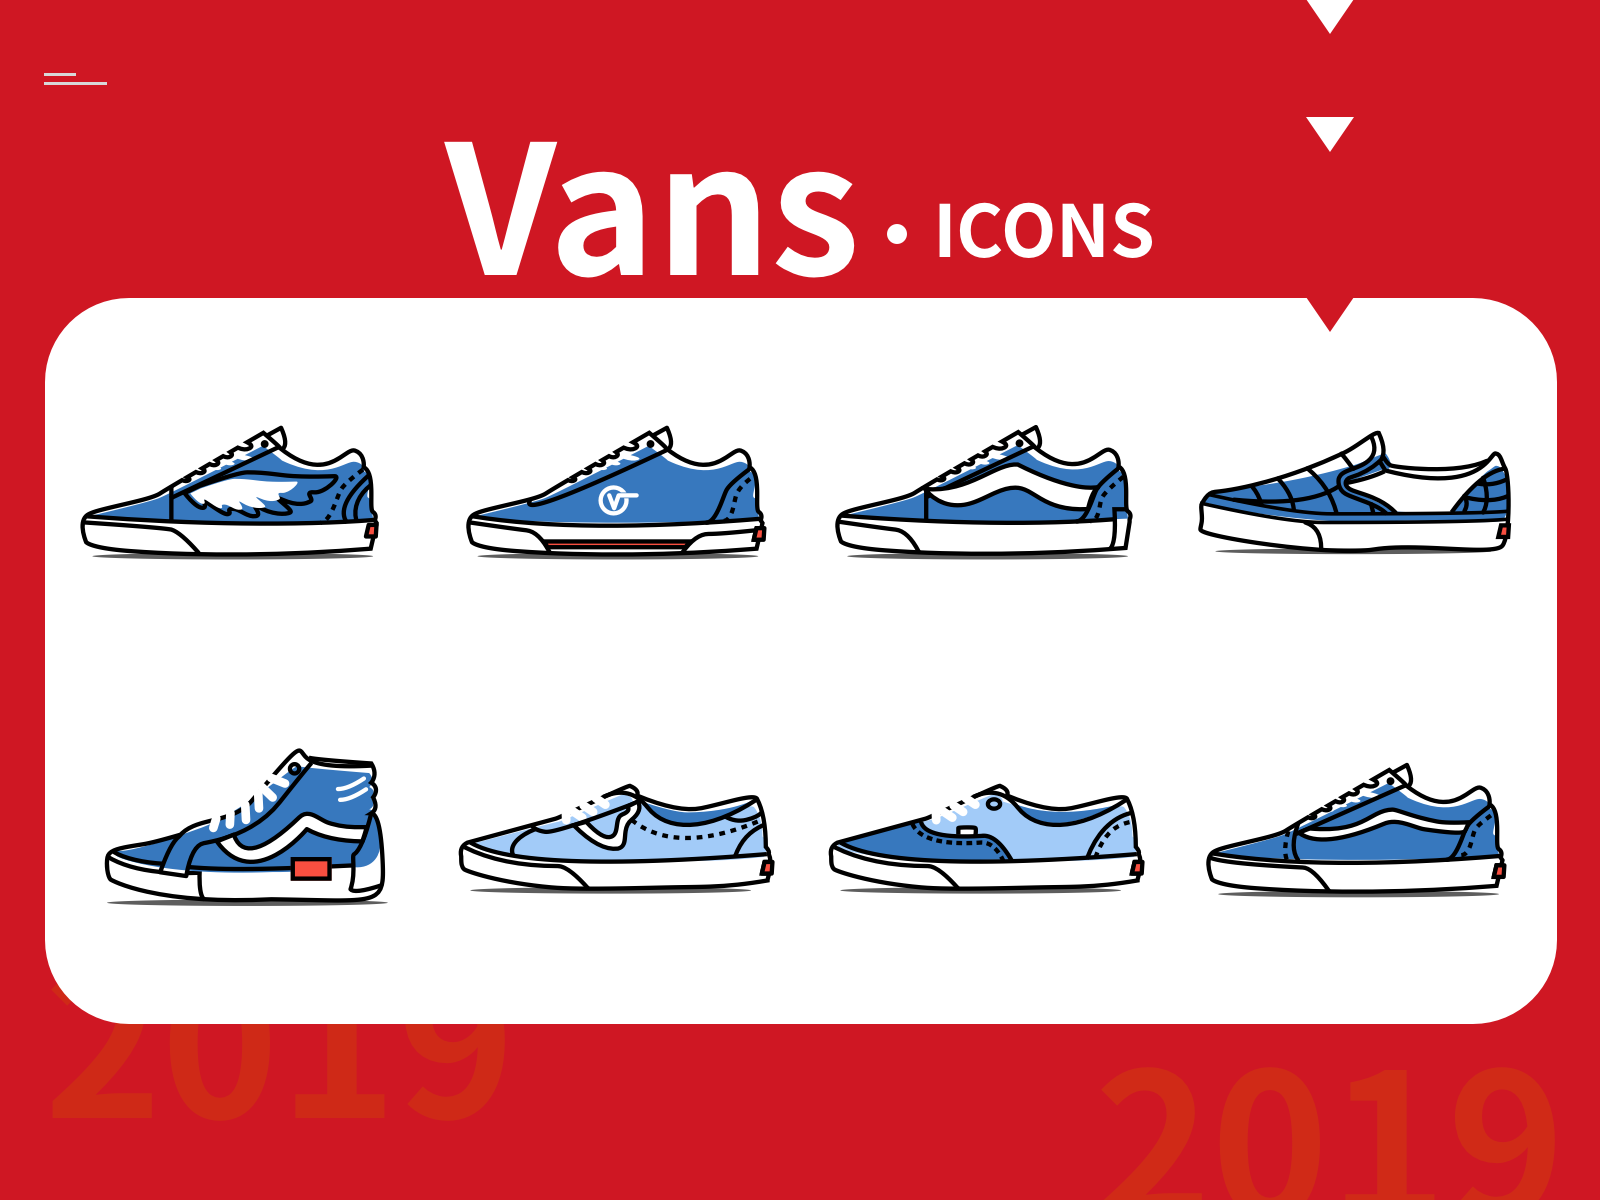 vans shoes with design